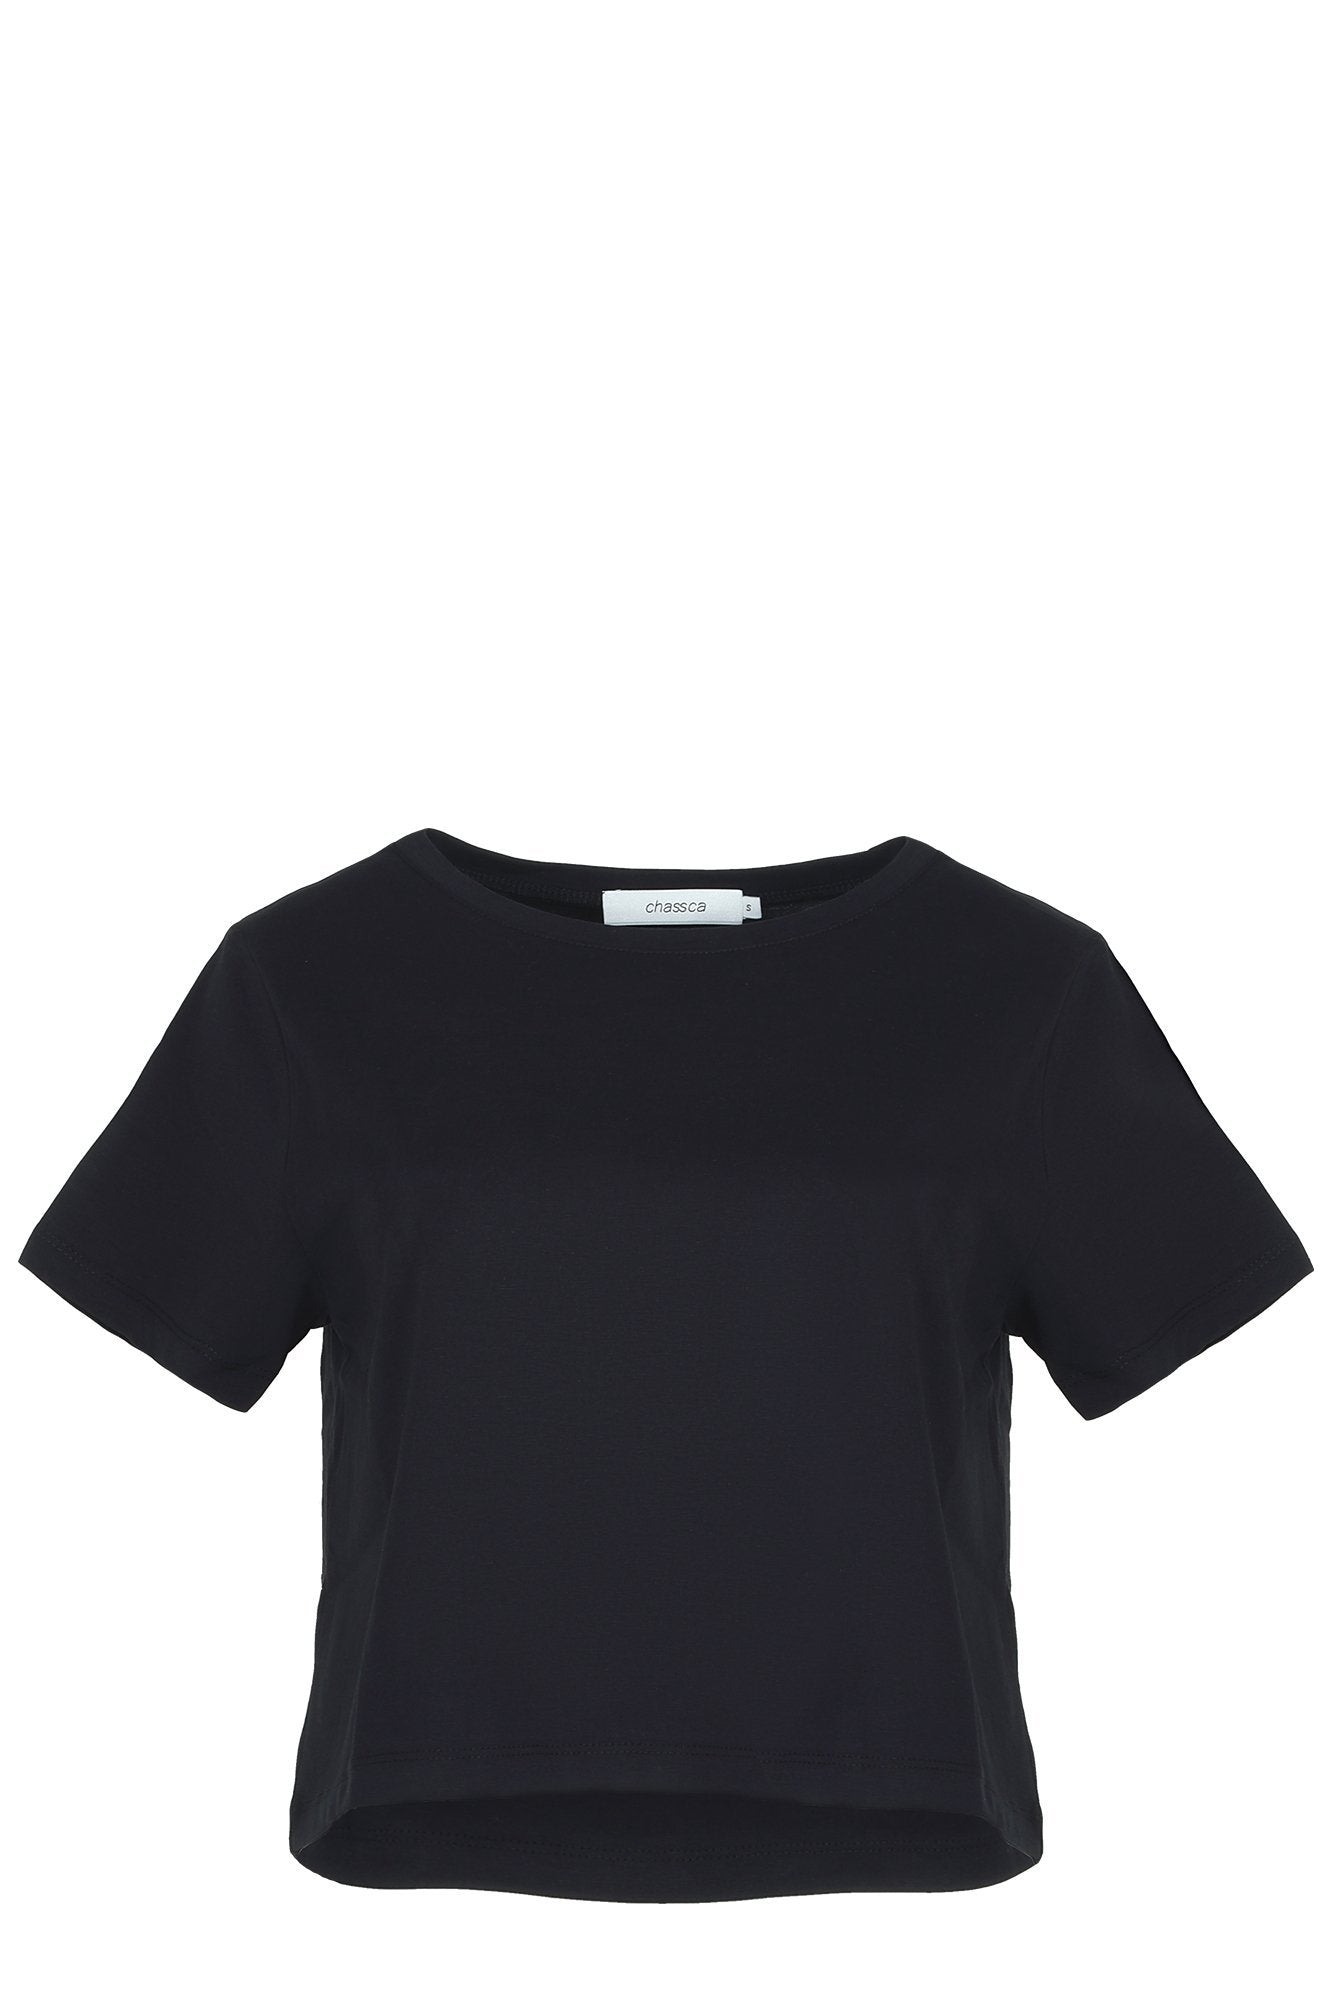 chassca basic boat-neck loose crop top t-shirt - Breakmood